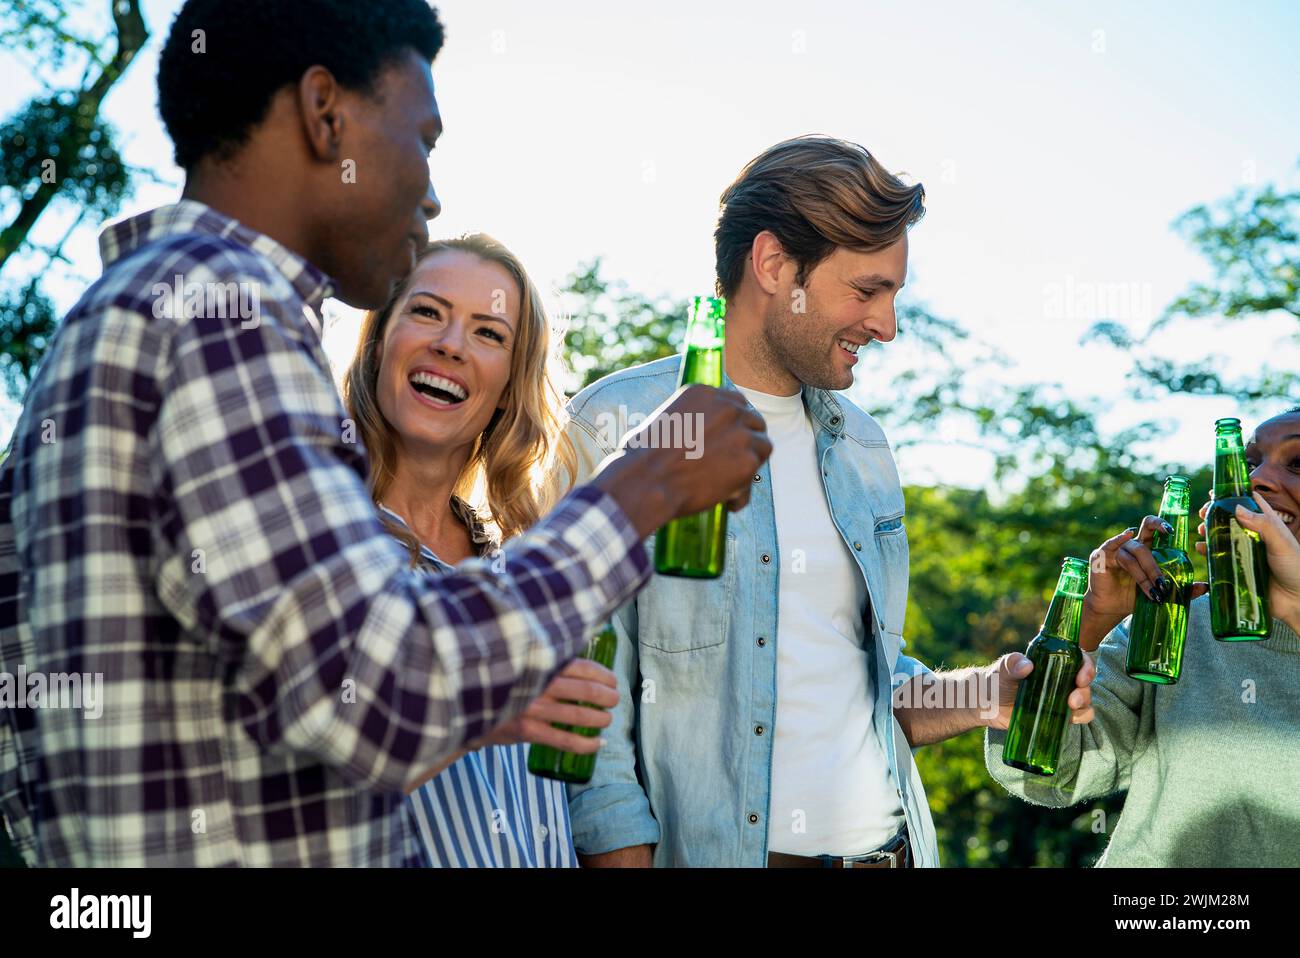 Group of friends hanging on rooftop drinking beer during sunset Stock Photo